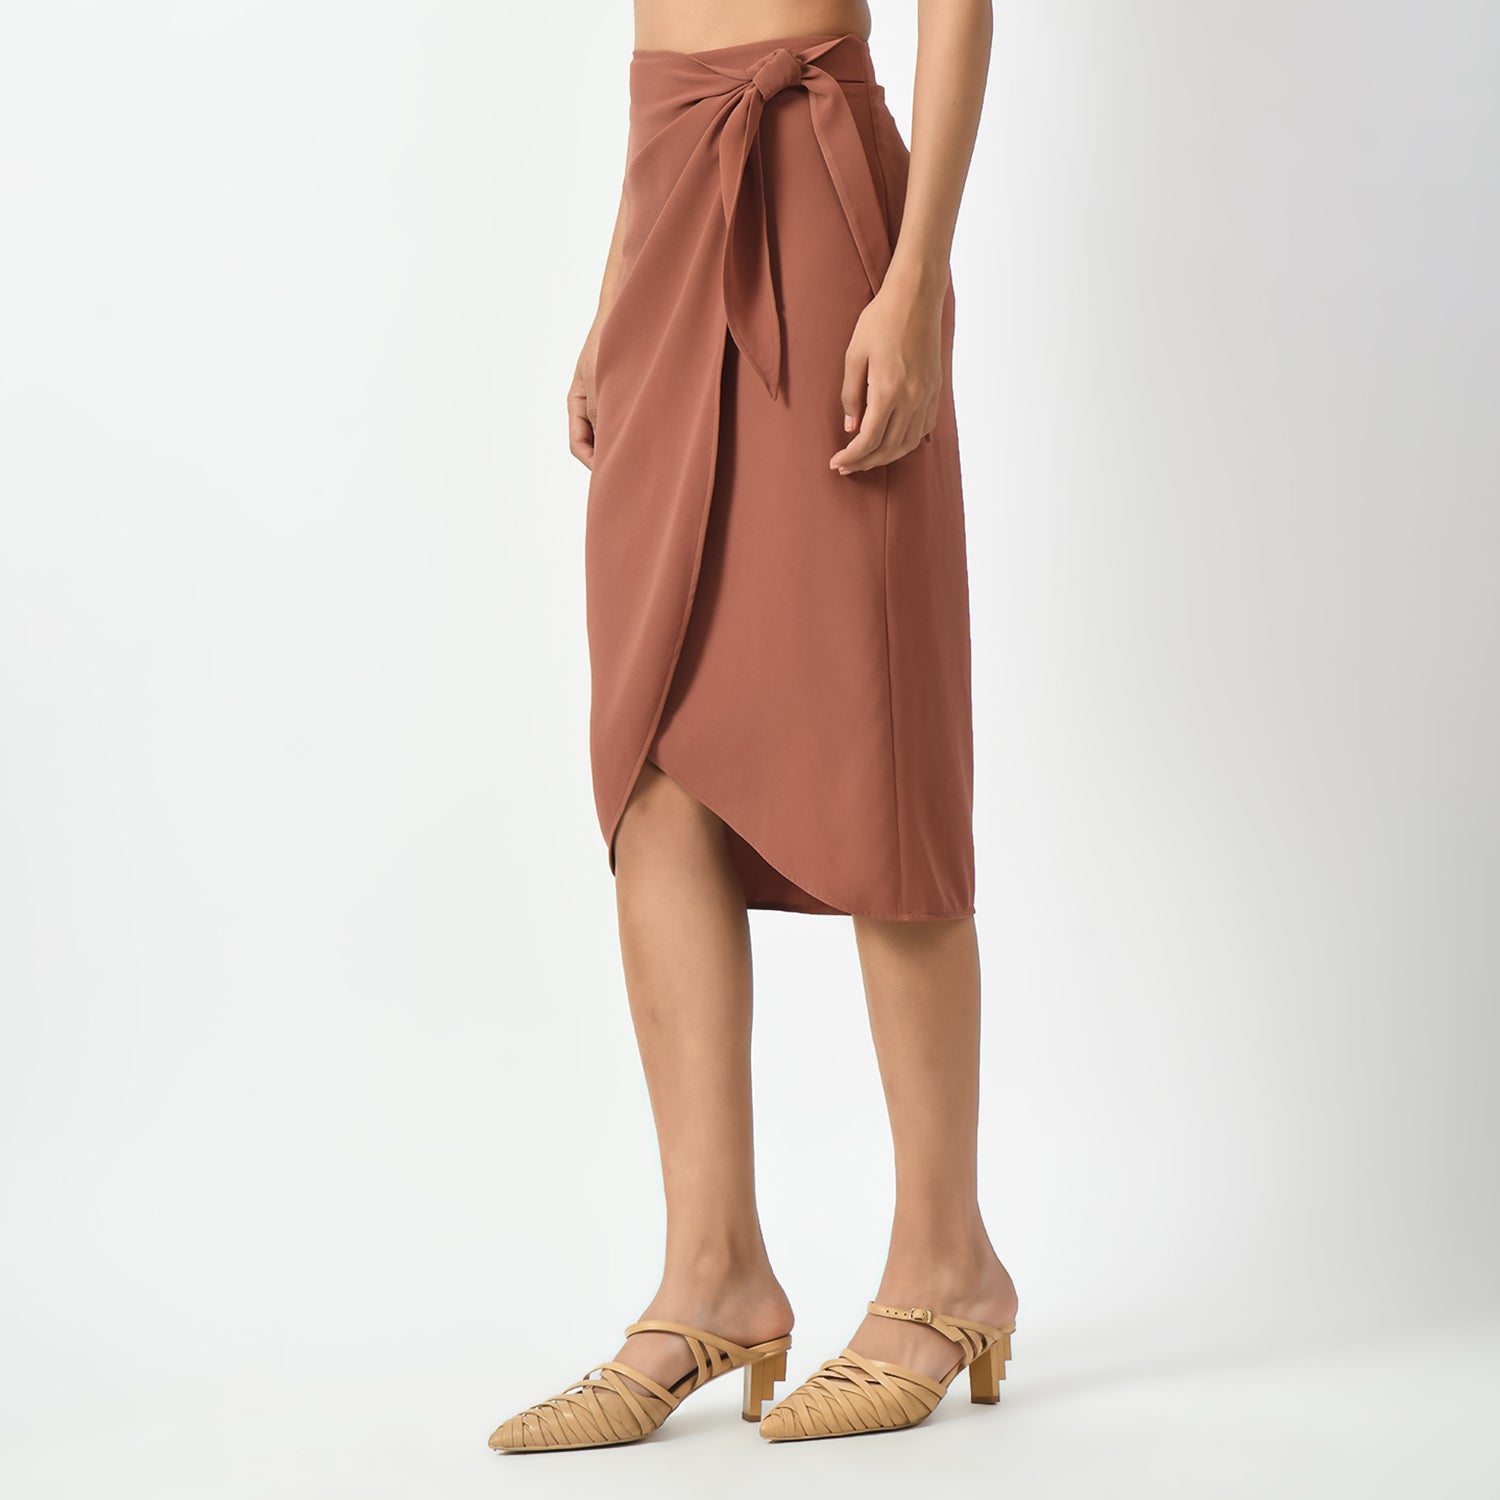 Peach Overlap Skirt With Tie Knot